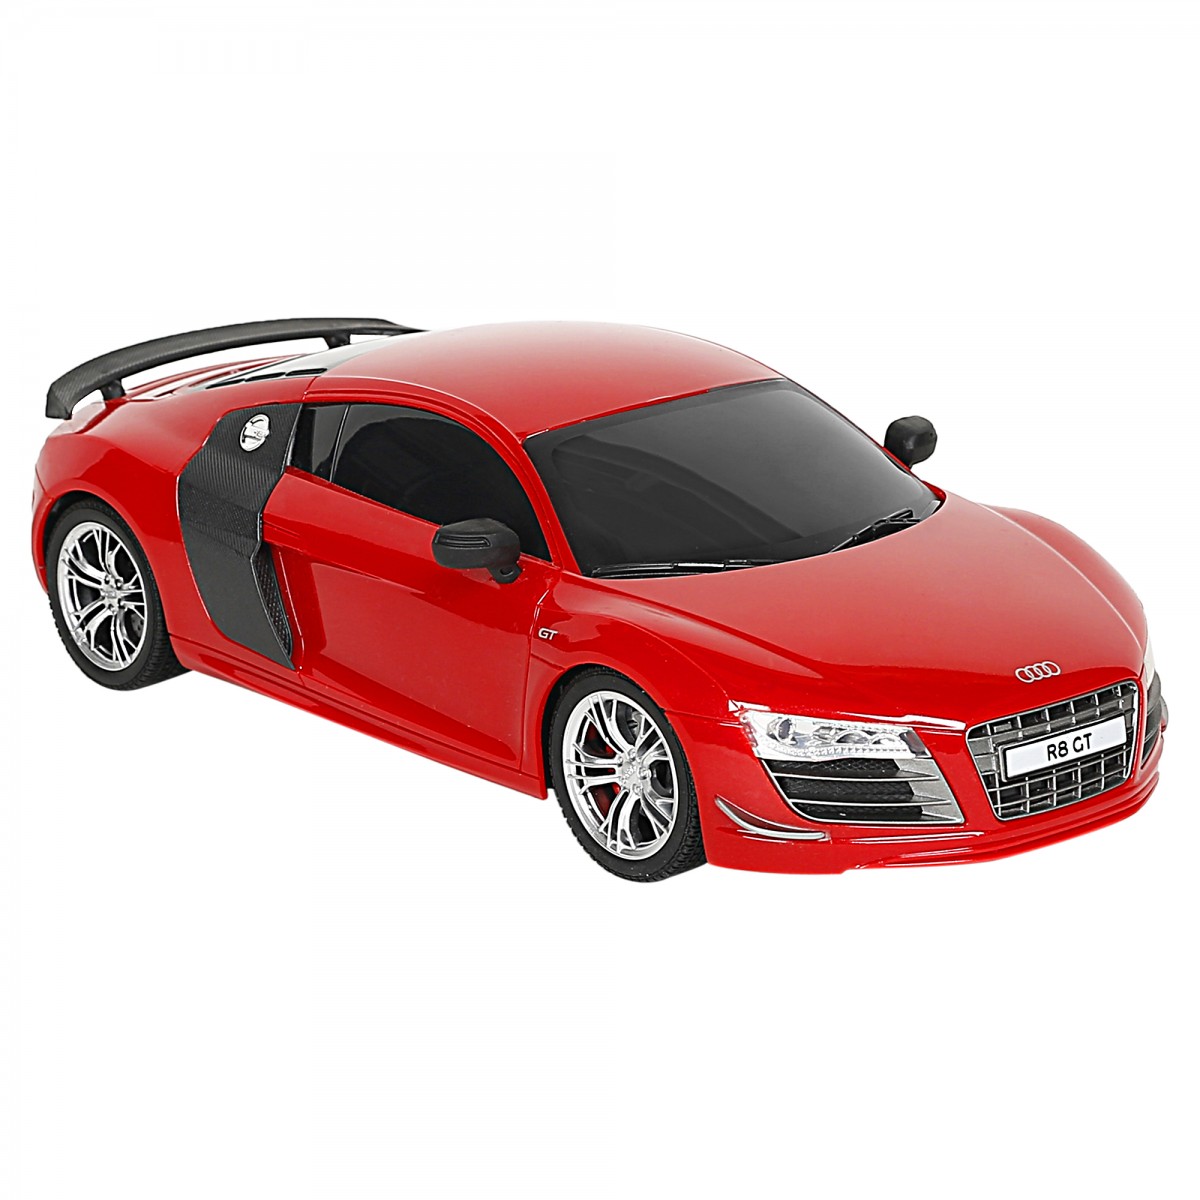 Ralleys Audi R8 GT Remote Control Car for Kids, 6Y+, Red